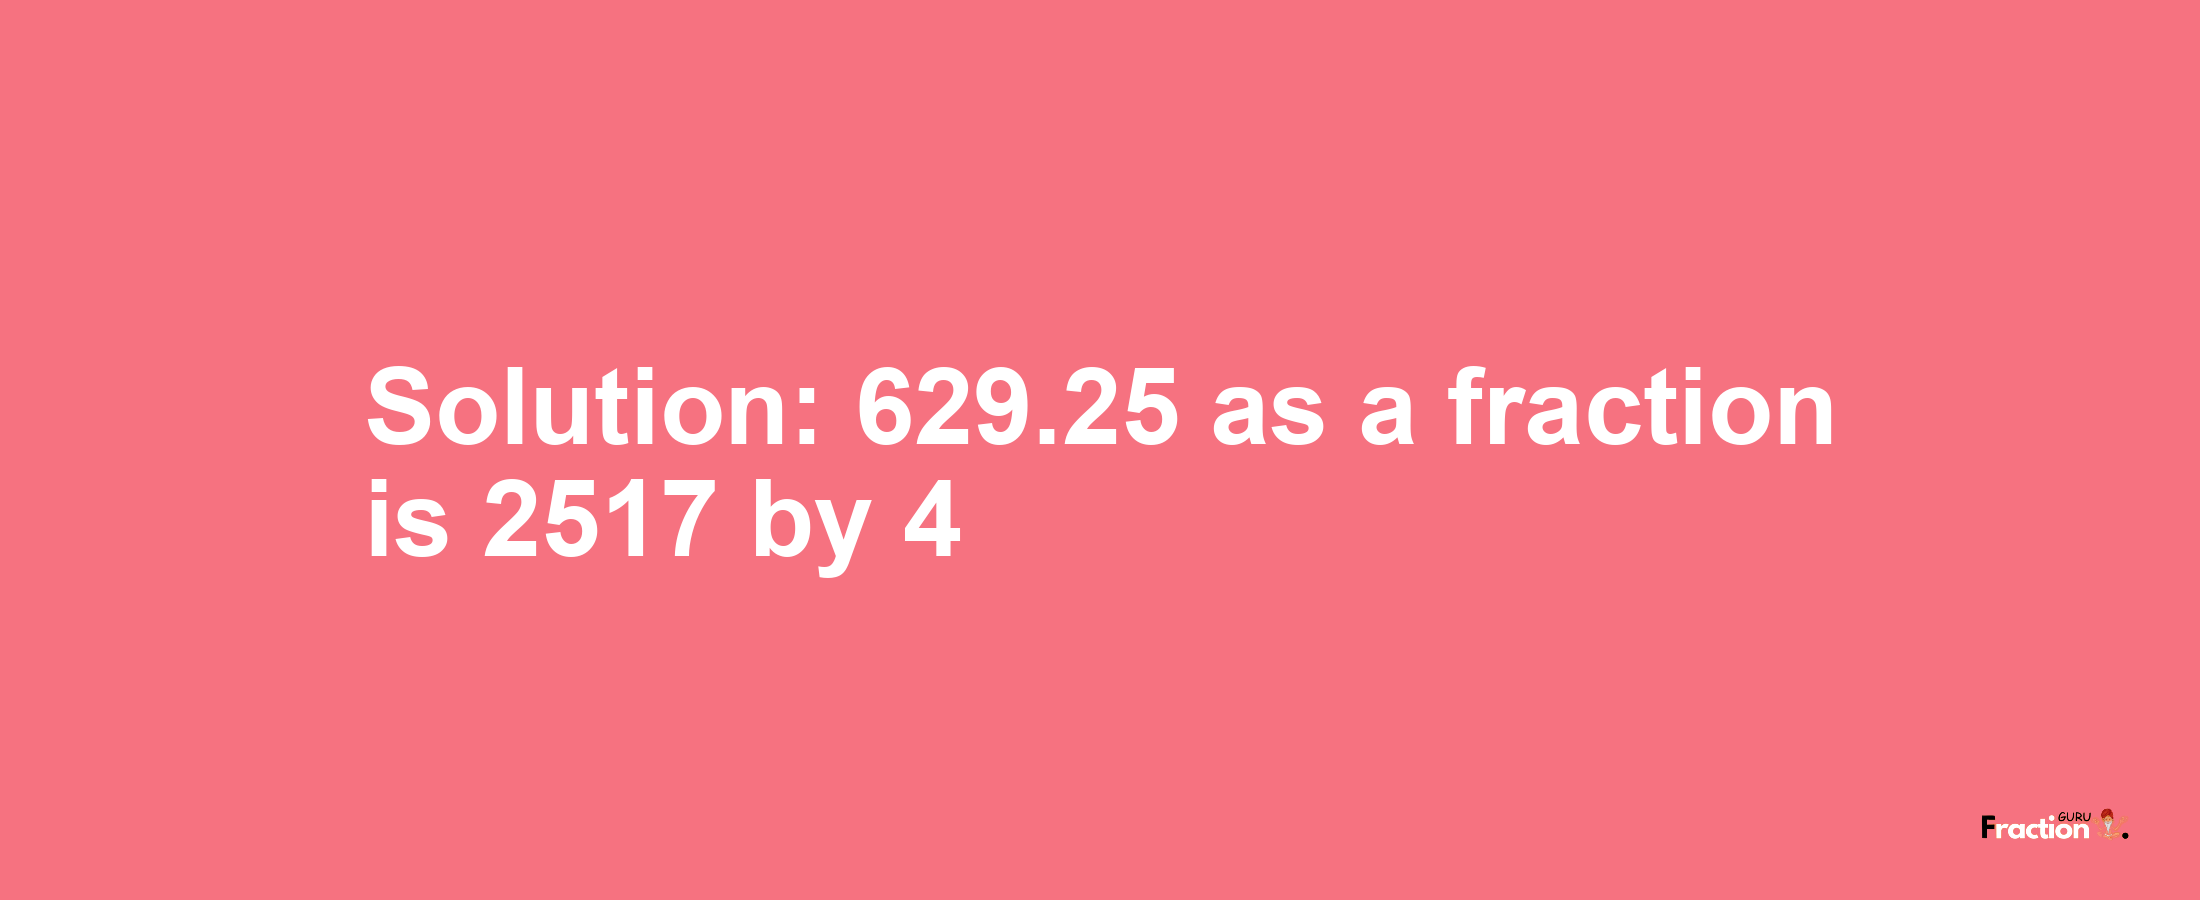 Solution:629.25 as a fraction is 2517/4